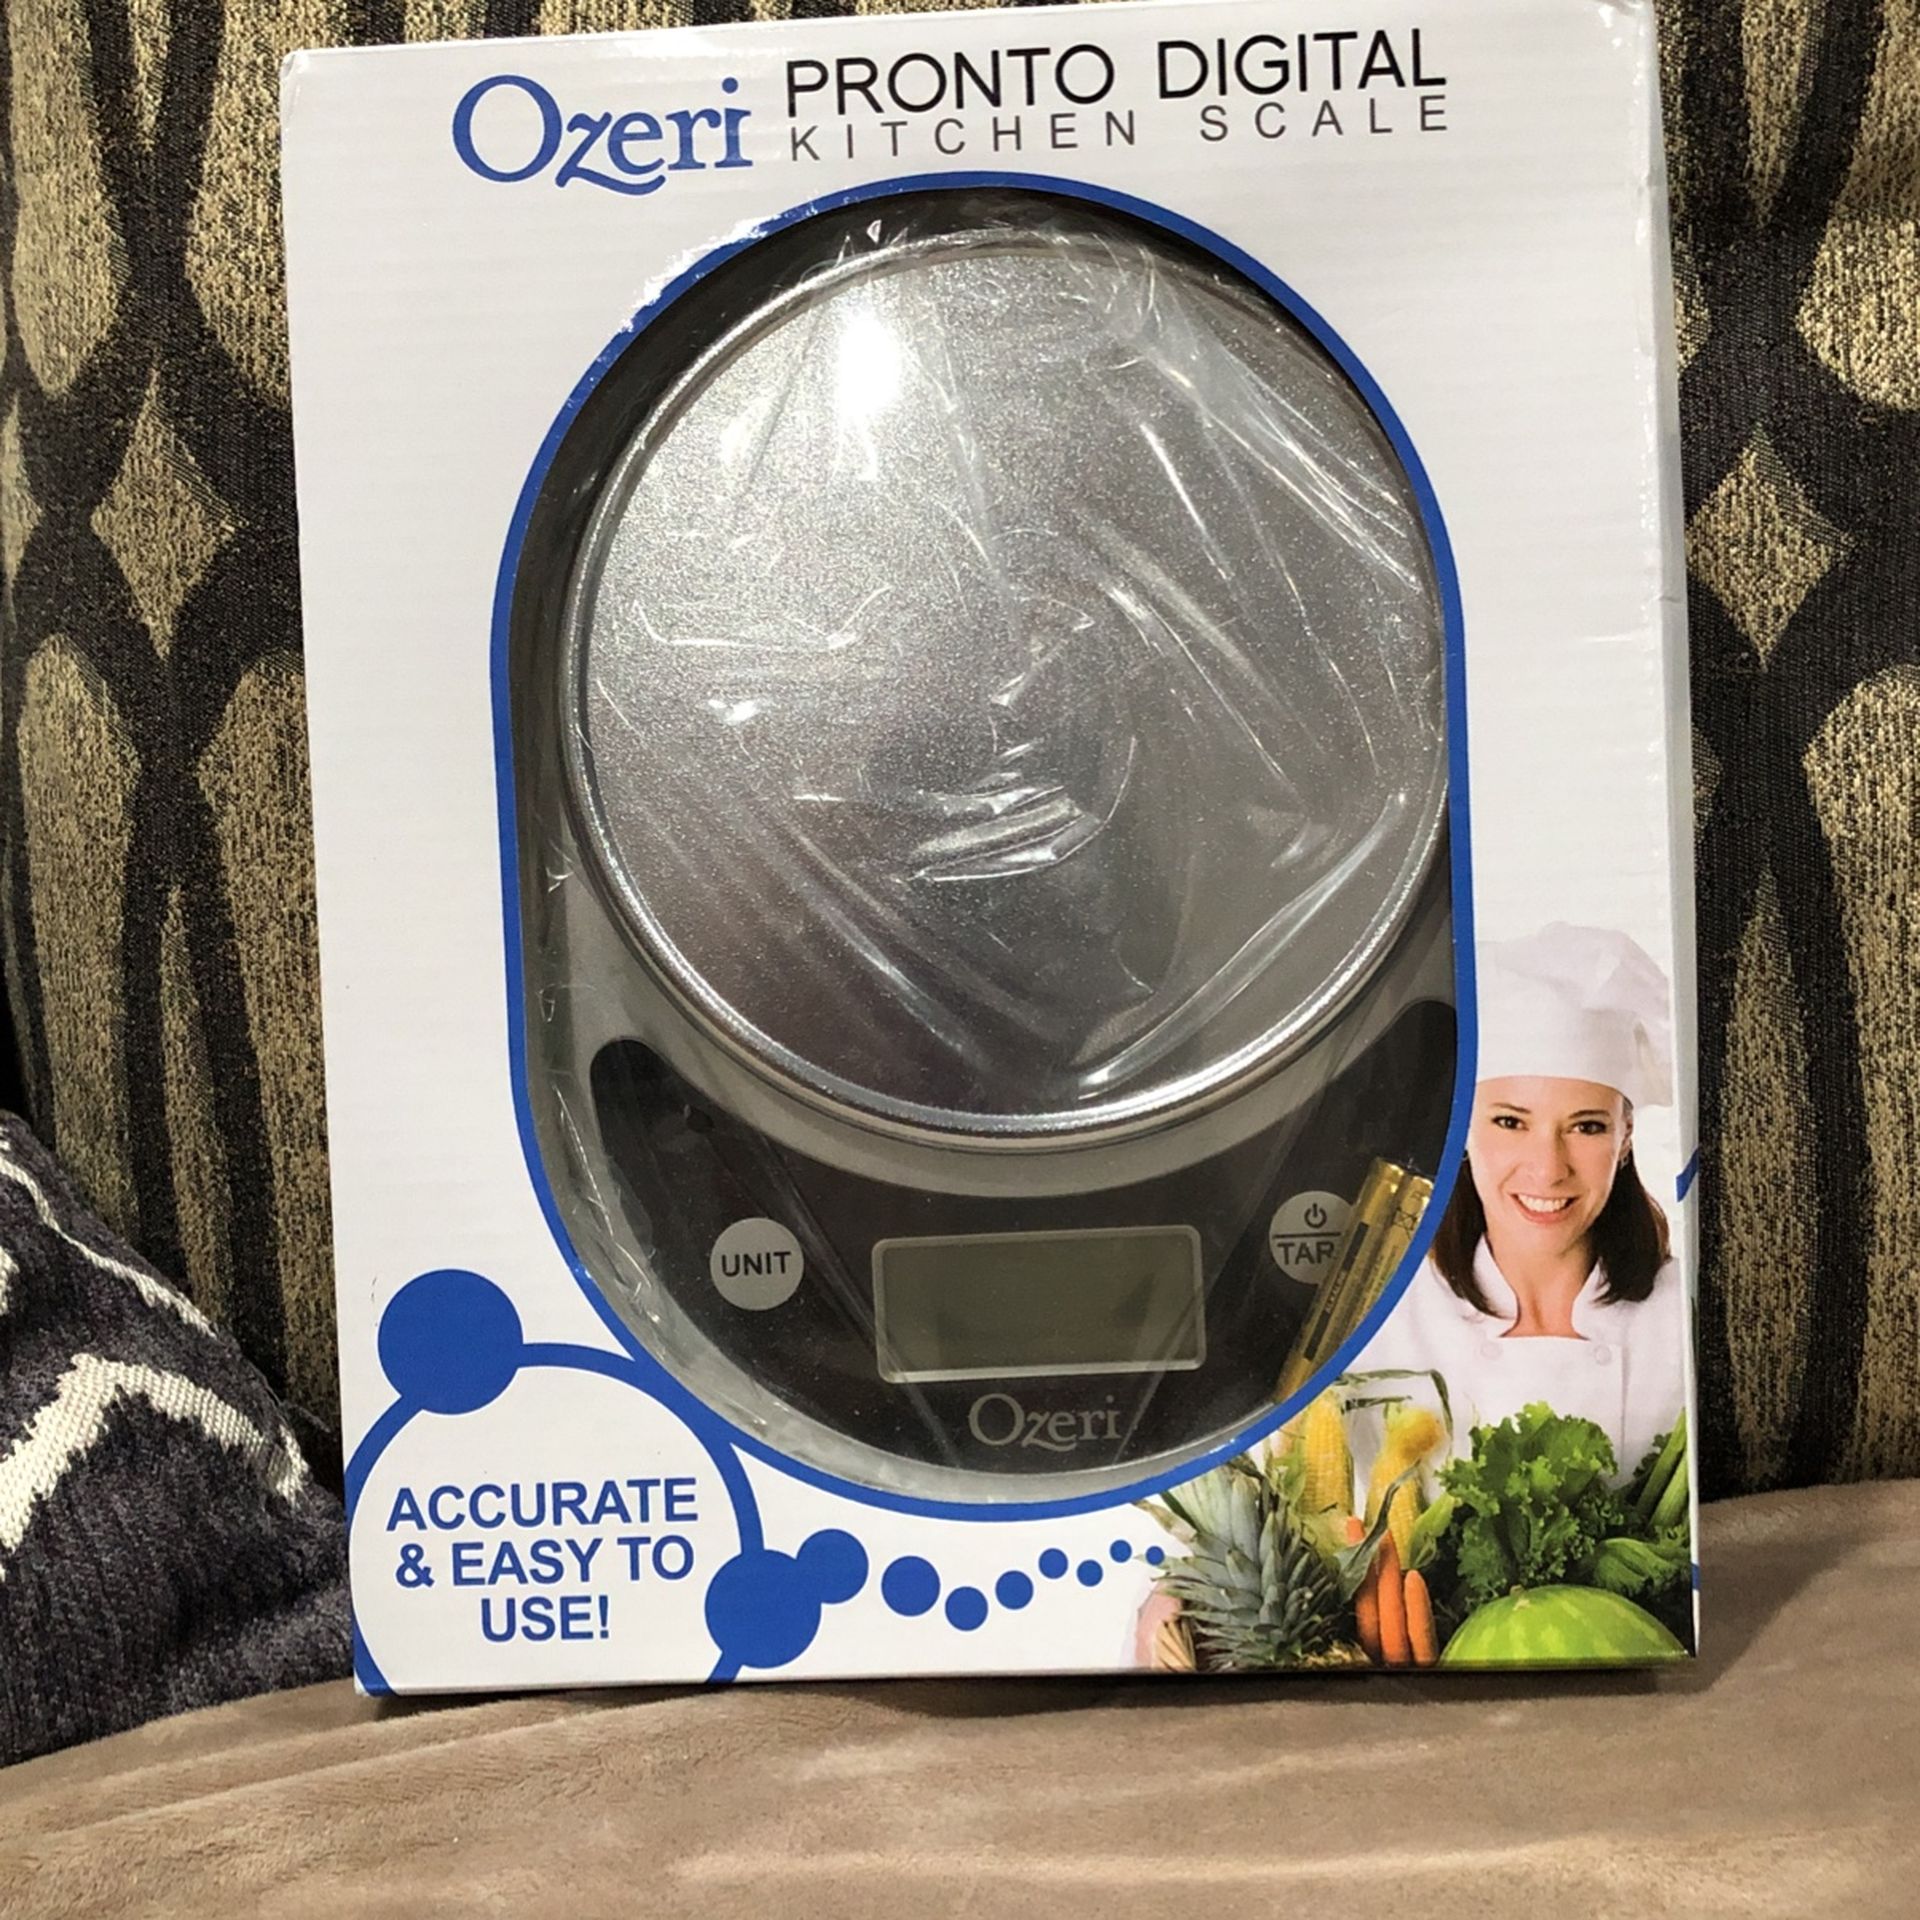 Ozeri Pronto Digital Multifunction Kitchen and Food Scale, All Silver